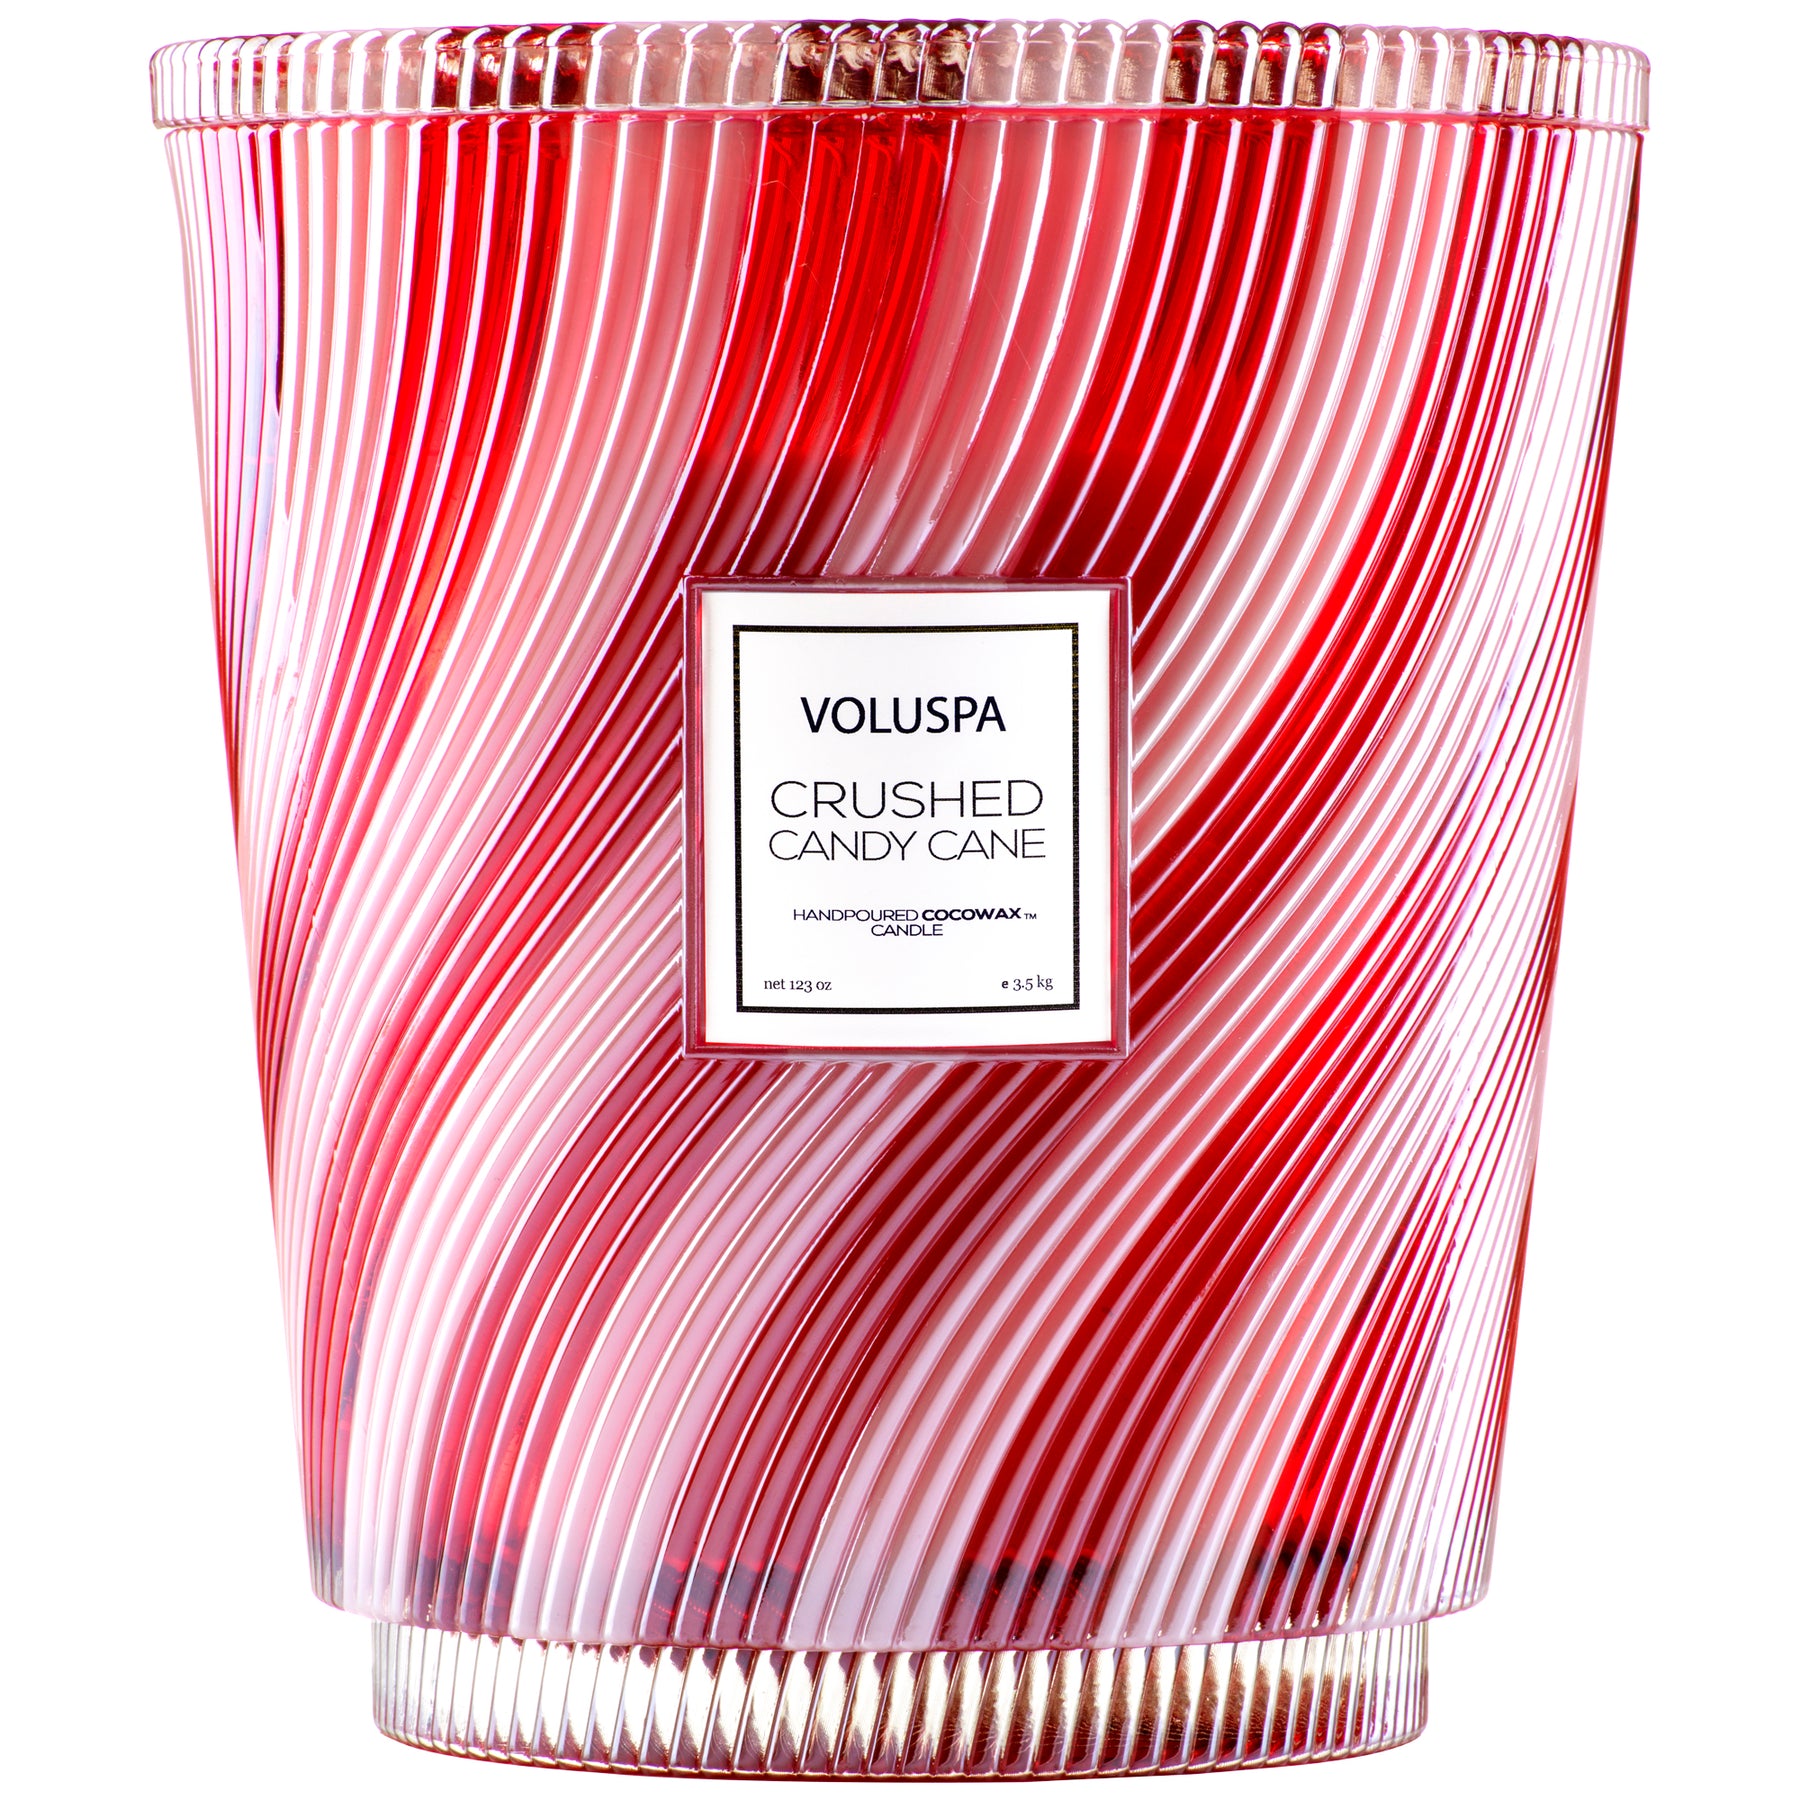 Crushed Candy Cane - Limited Edition Hearth 5 Wick Glass Candle